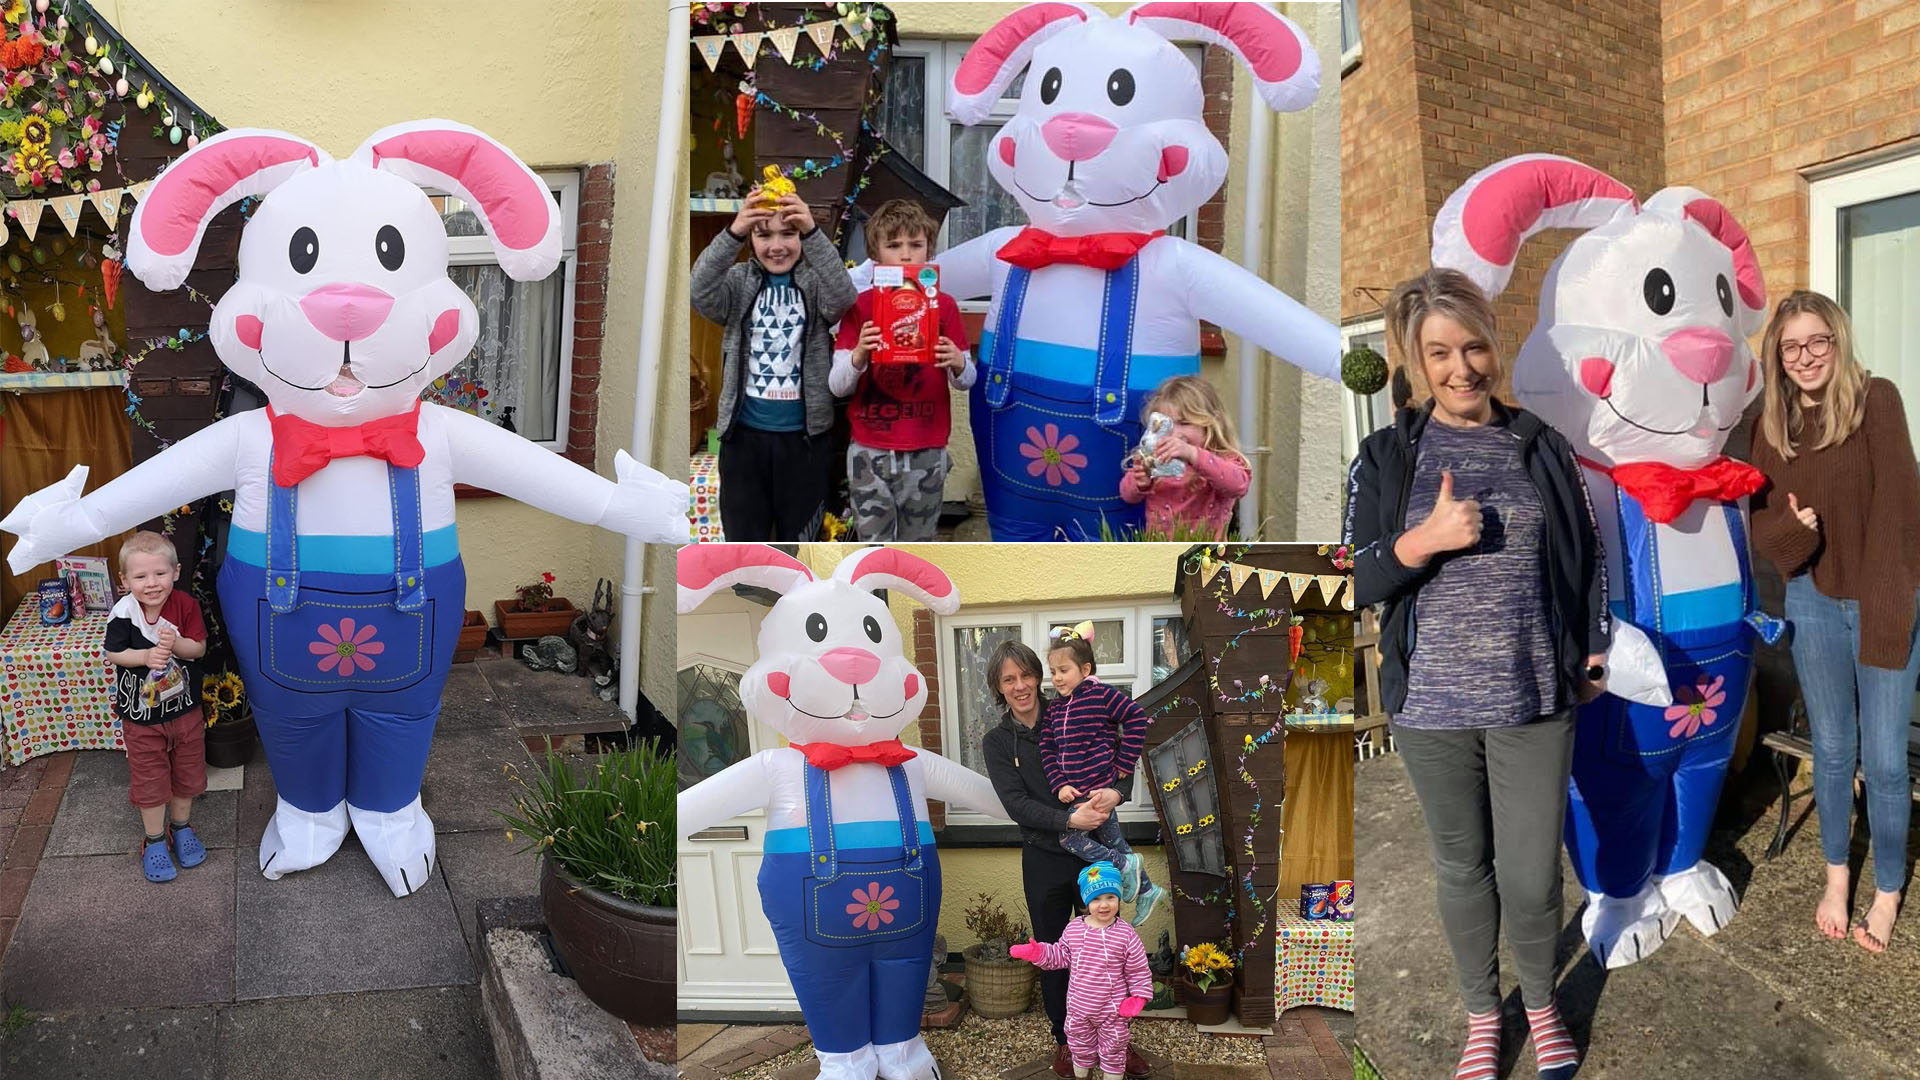 A collage of photos of children with an inflatable Easter Bunny